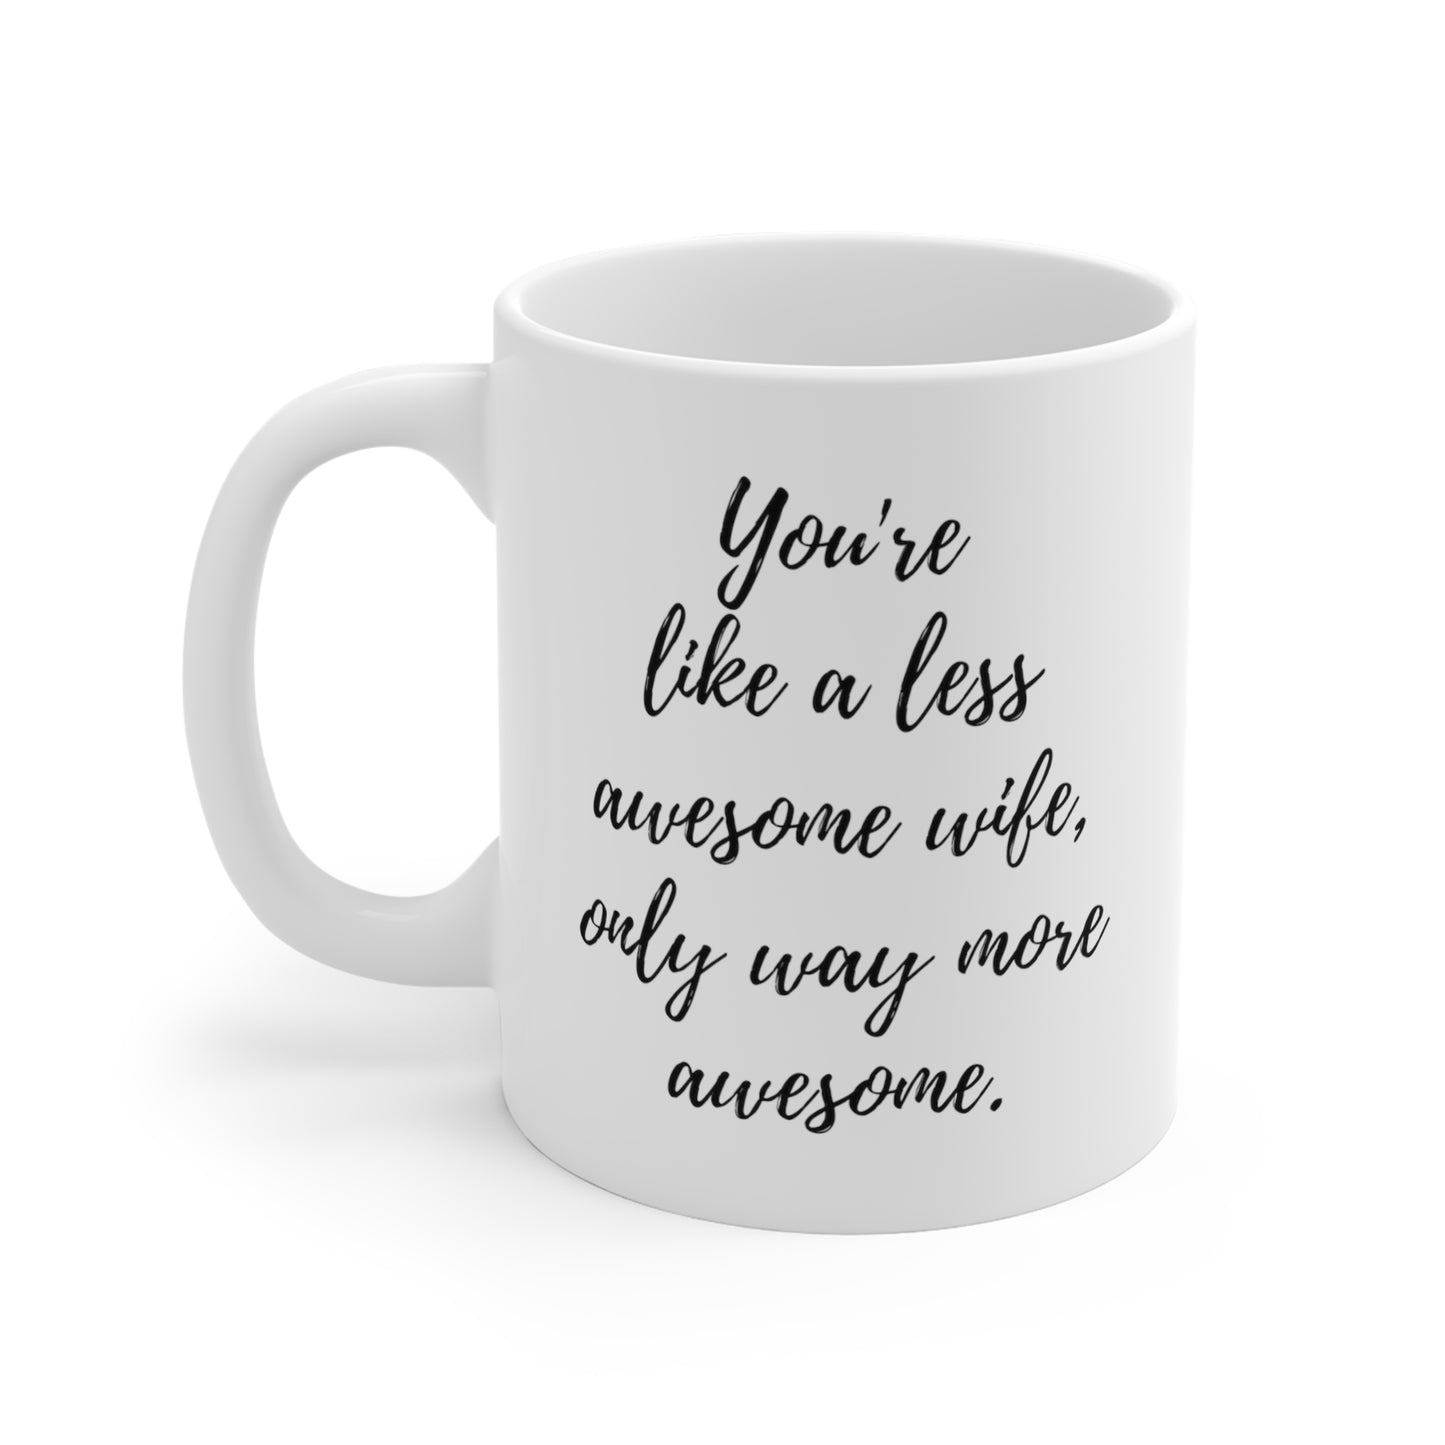 You're Like A Less Awesome Wife, Only Way More Awesome | Funny, Snarky Gift | White Ceramic Mug, Script Font